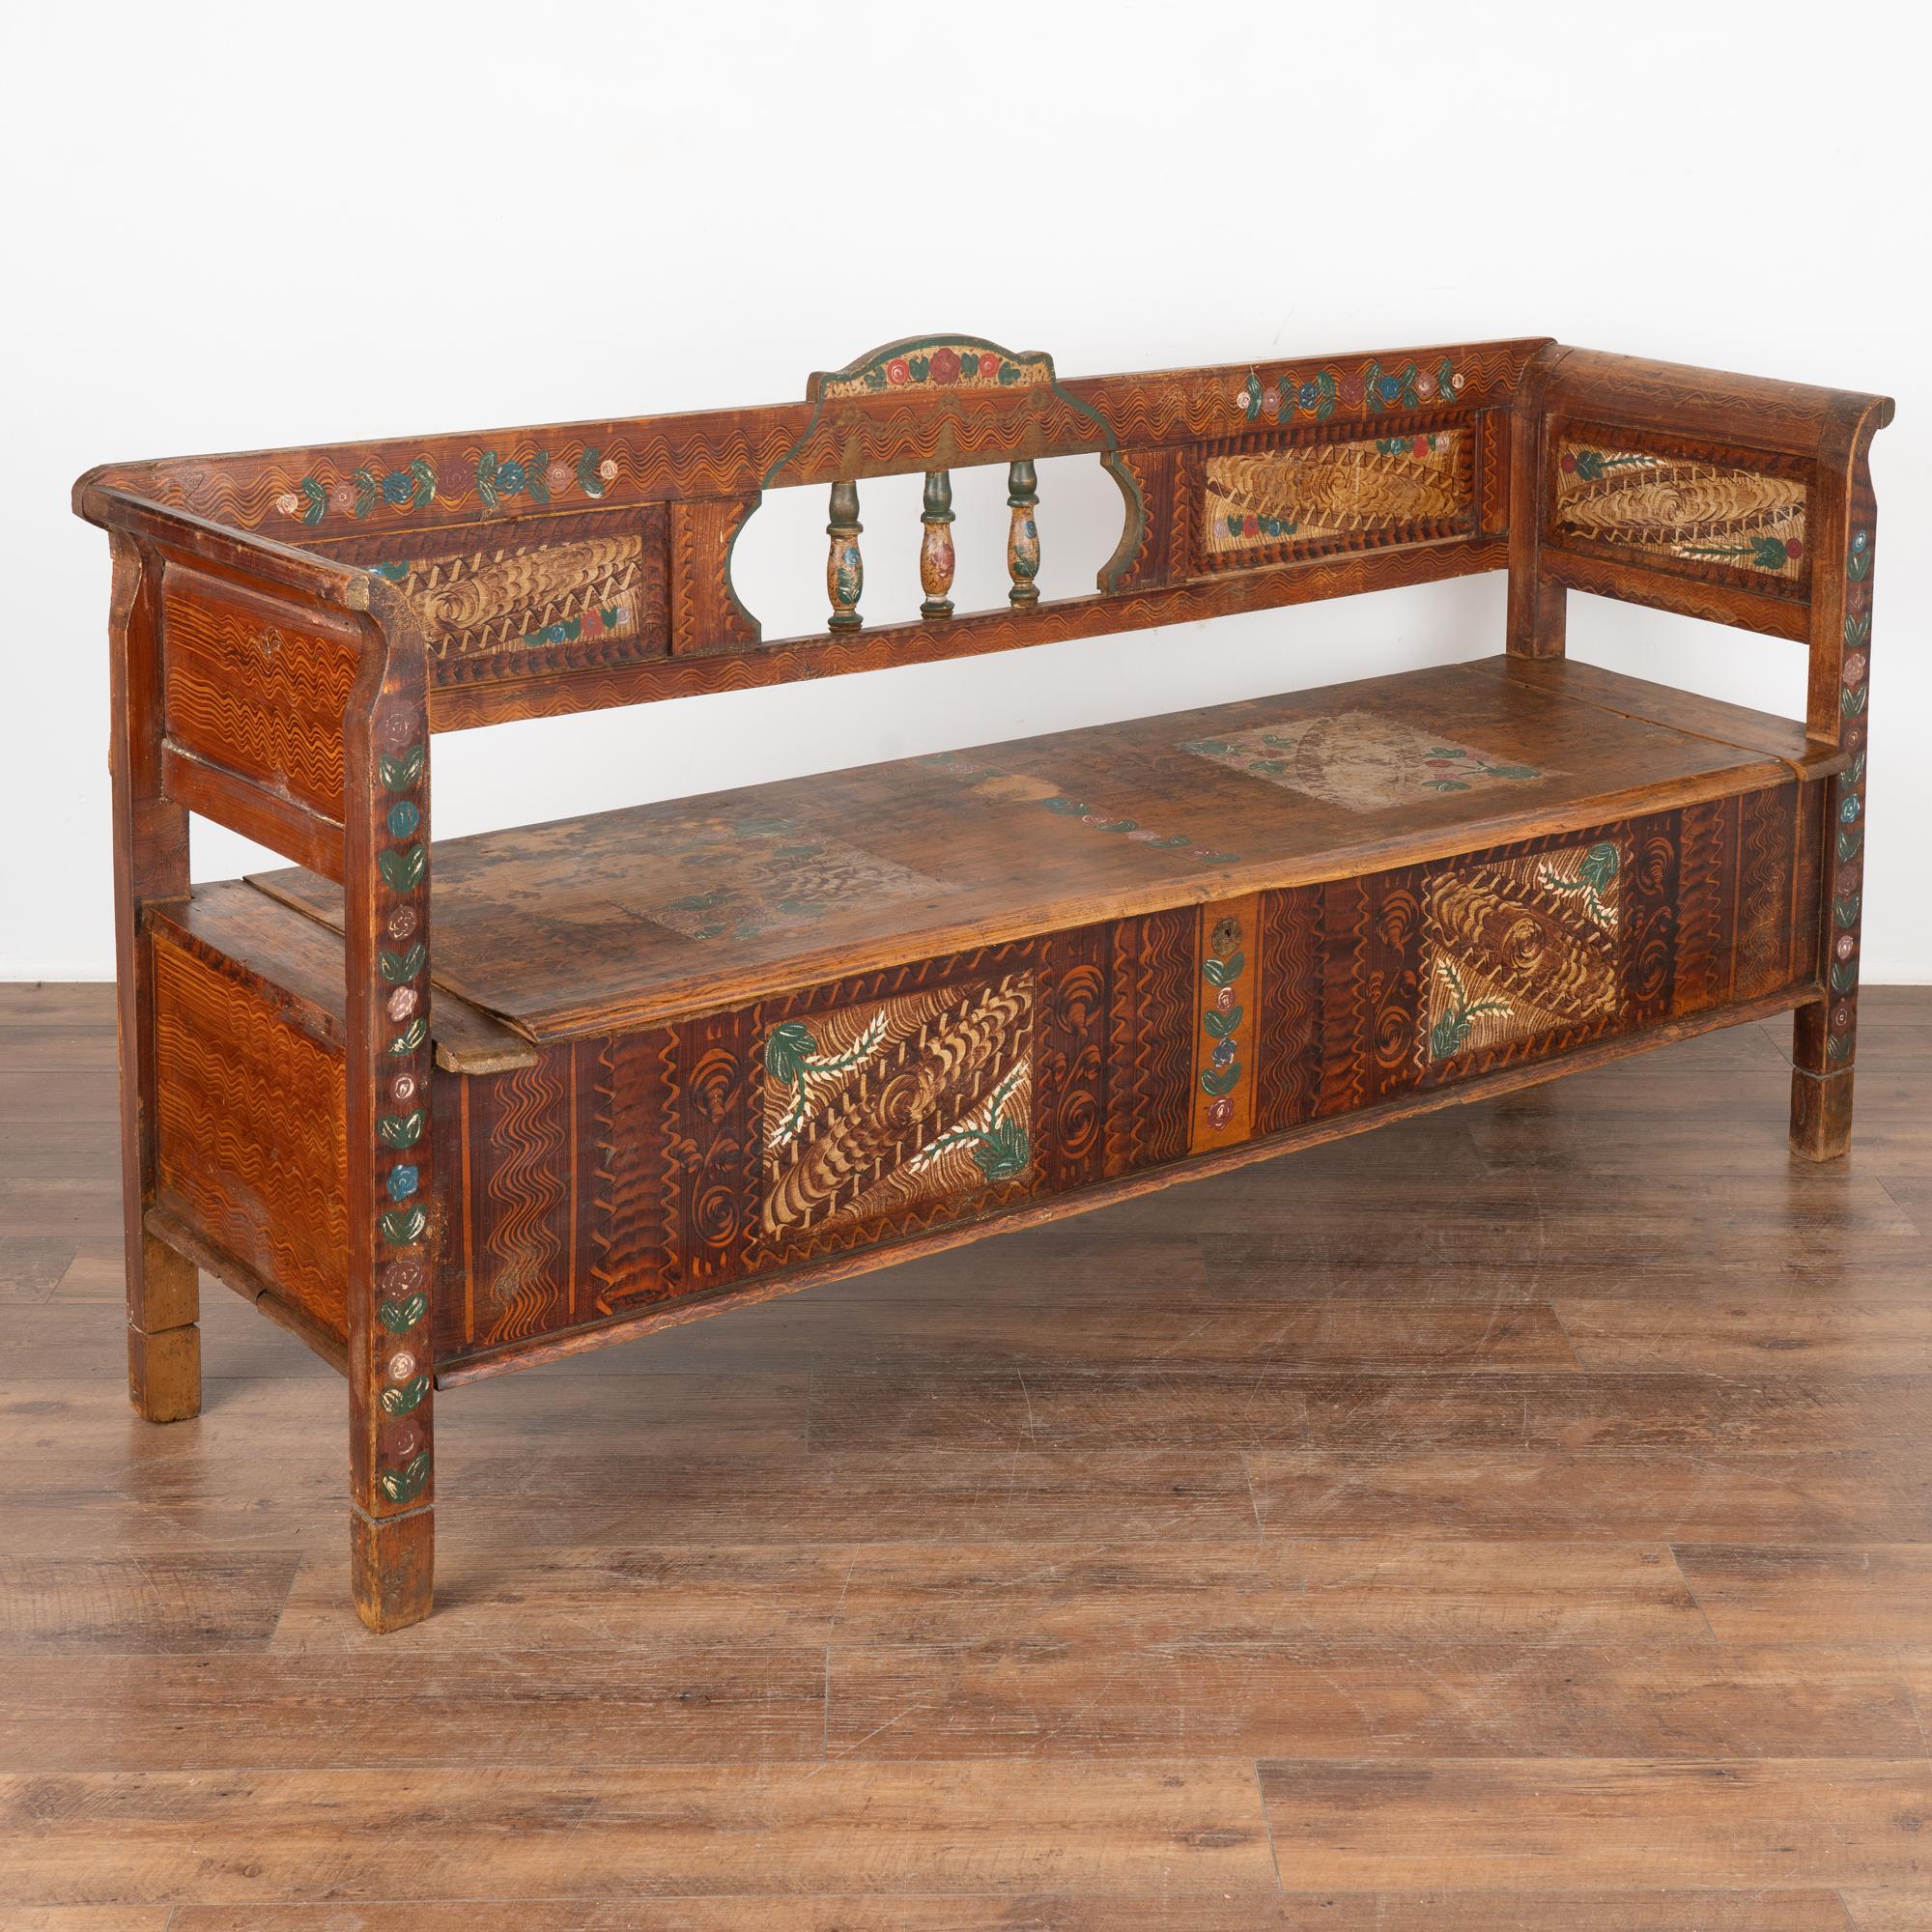 Original hand painted folk art pine bench displays traditional brown faux wood background and colorful floral motif.
Back has 3 decorative spindles, slightly curved armrests and hinged bench seat revealing interior storage. 
Restored, cleaned and